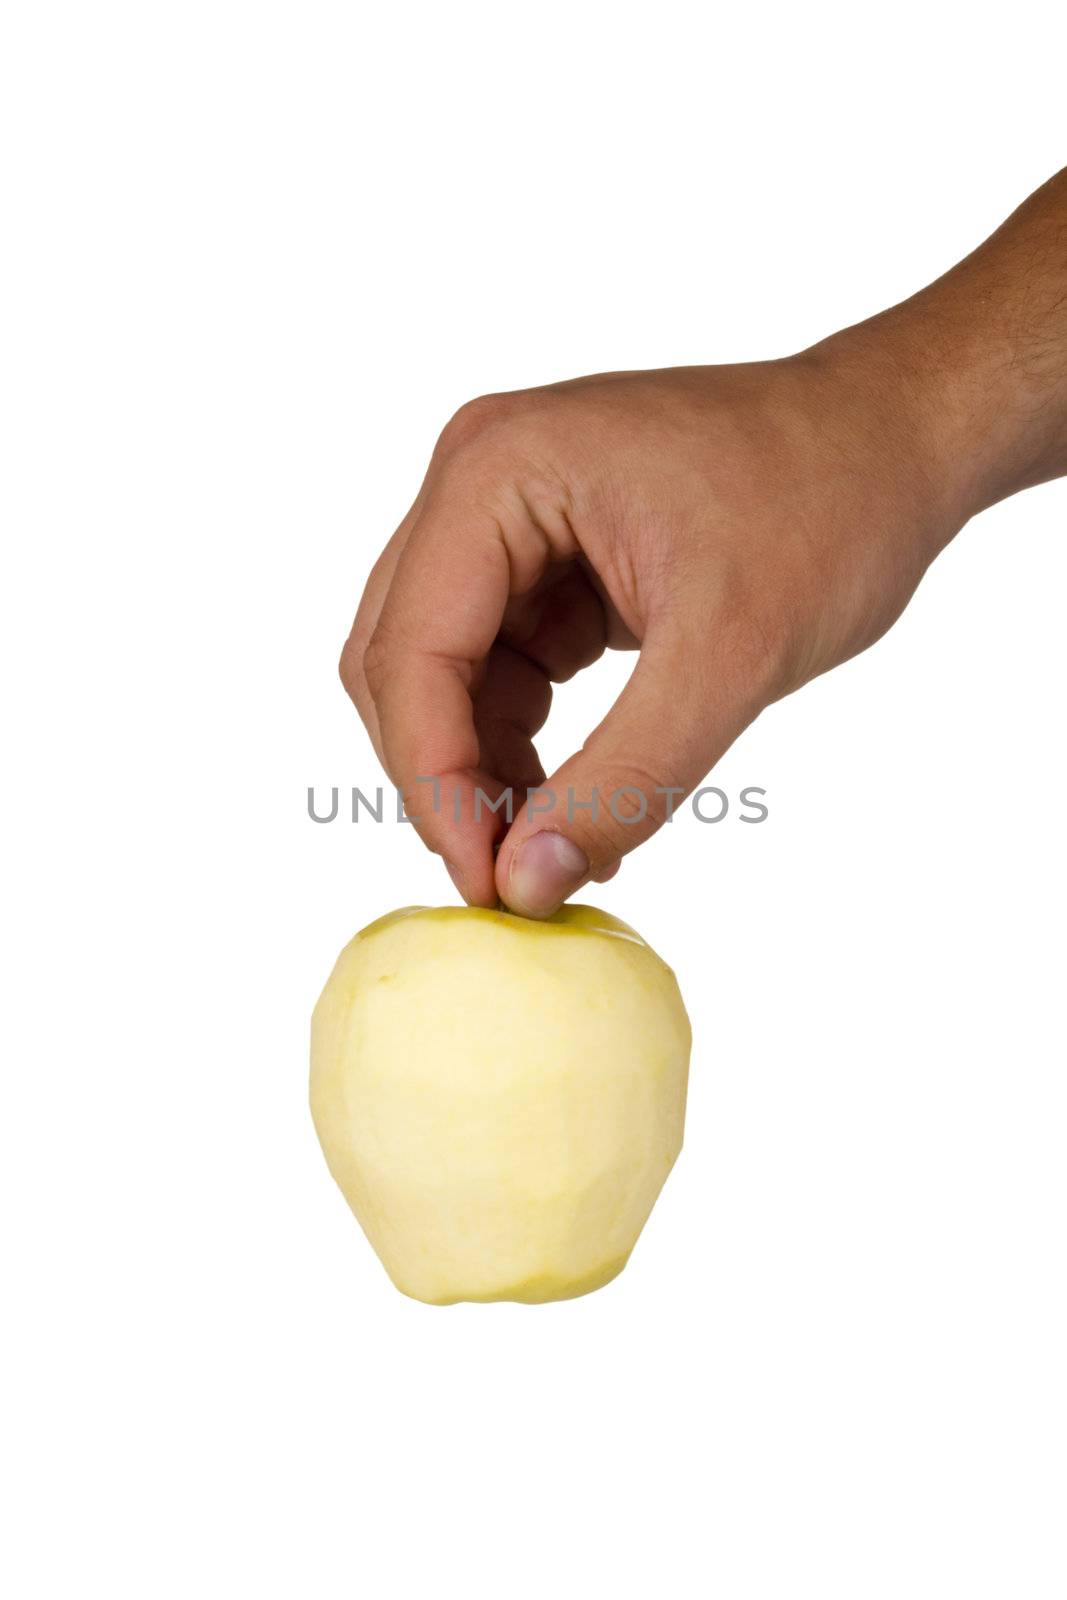 Peeled Golden Delicious apple in a hand isolated on a white background.